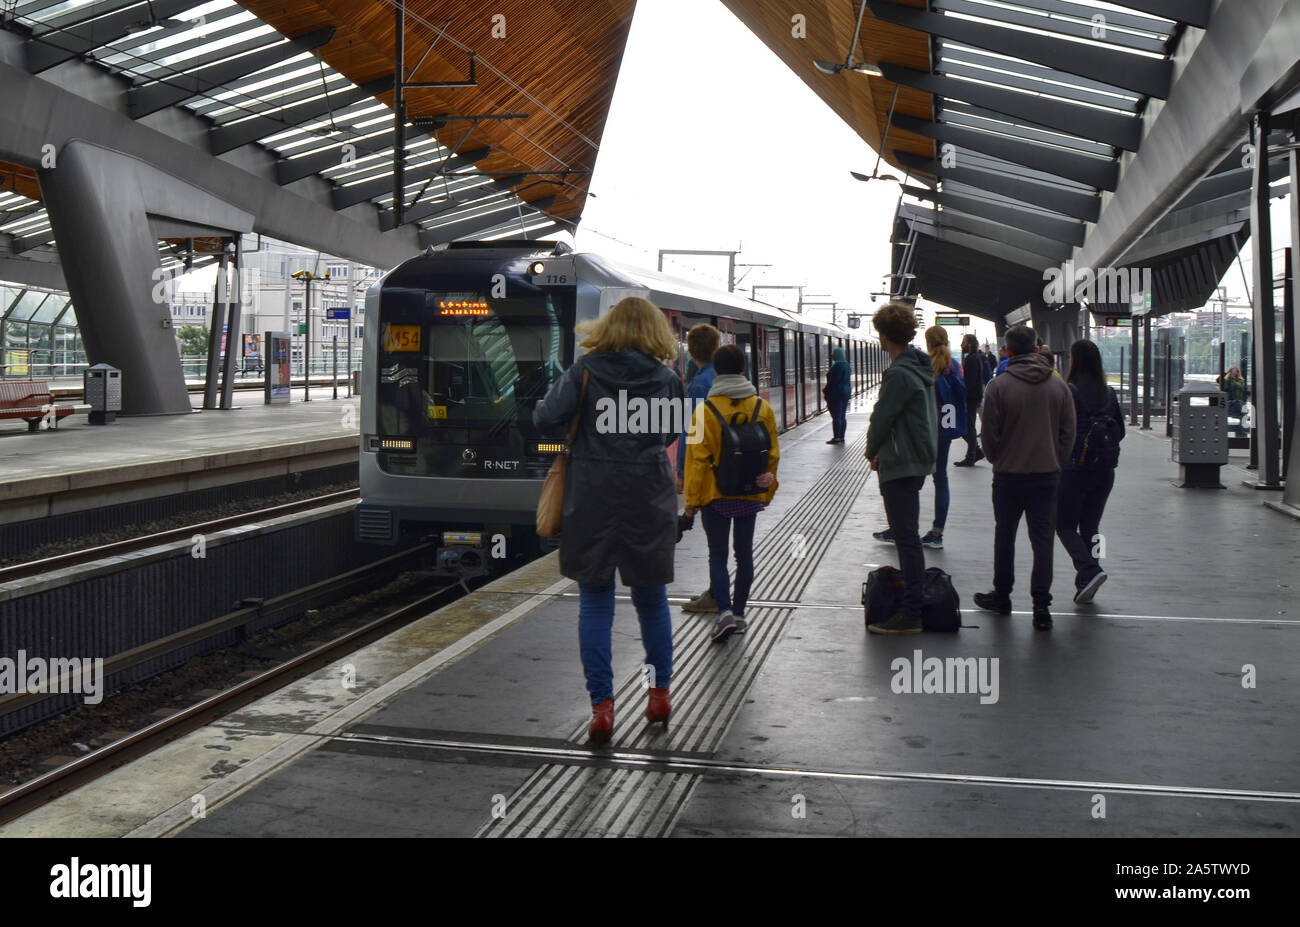 Amsterdam, Holland, August 2019. Inside the metro station bijlmer arena, travelers wait for the train on the quay. Modern structure with steel and woo Stock Photo